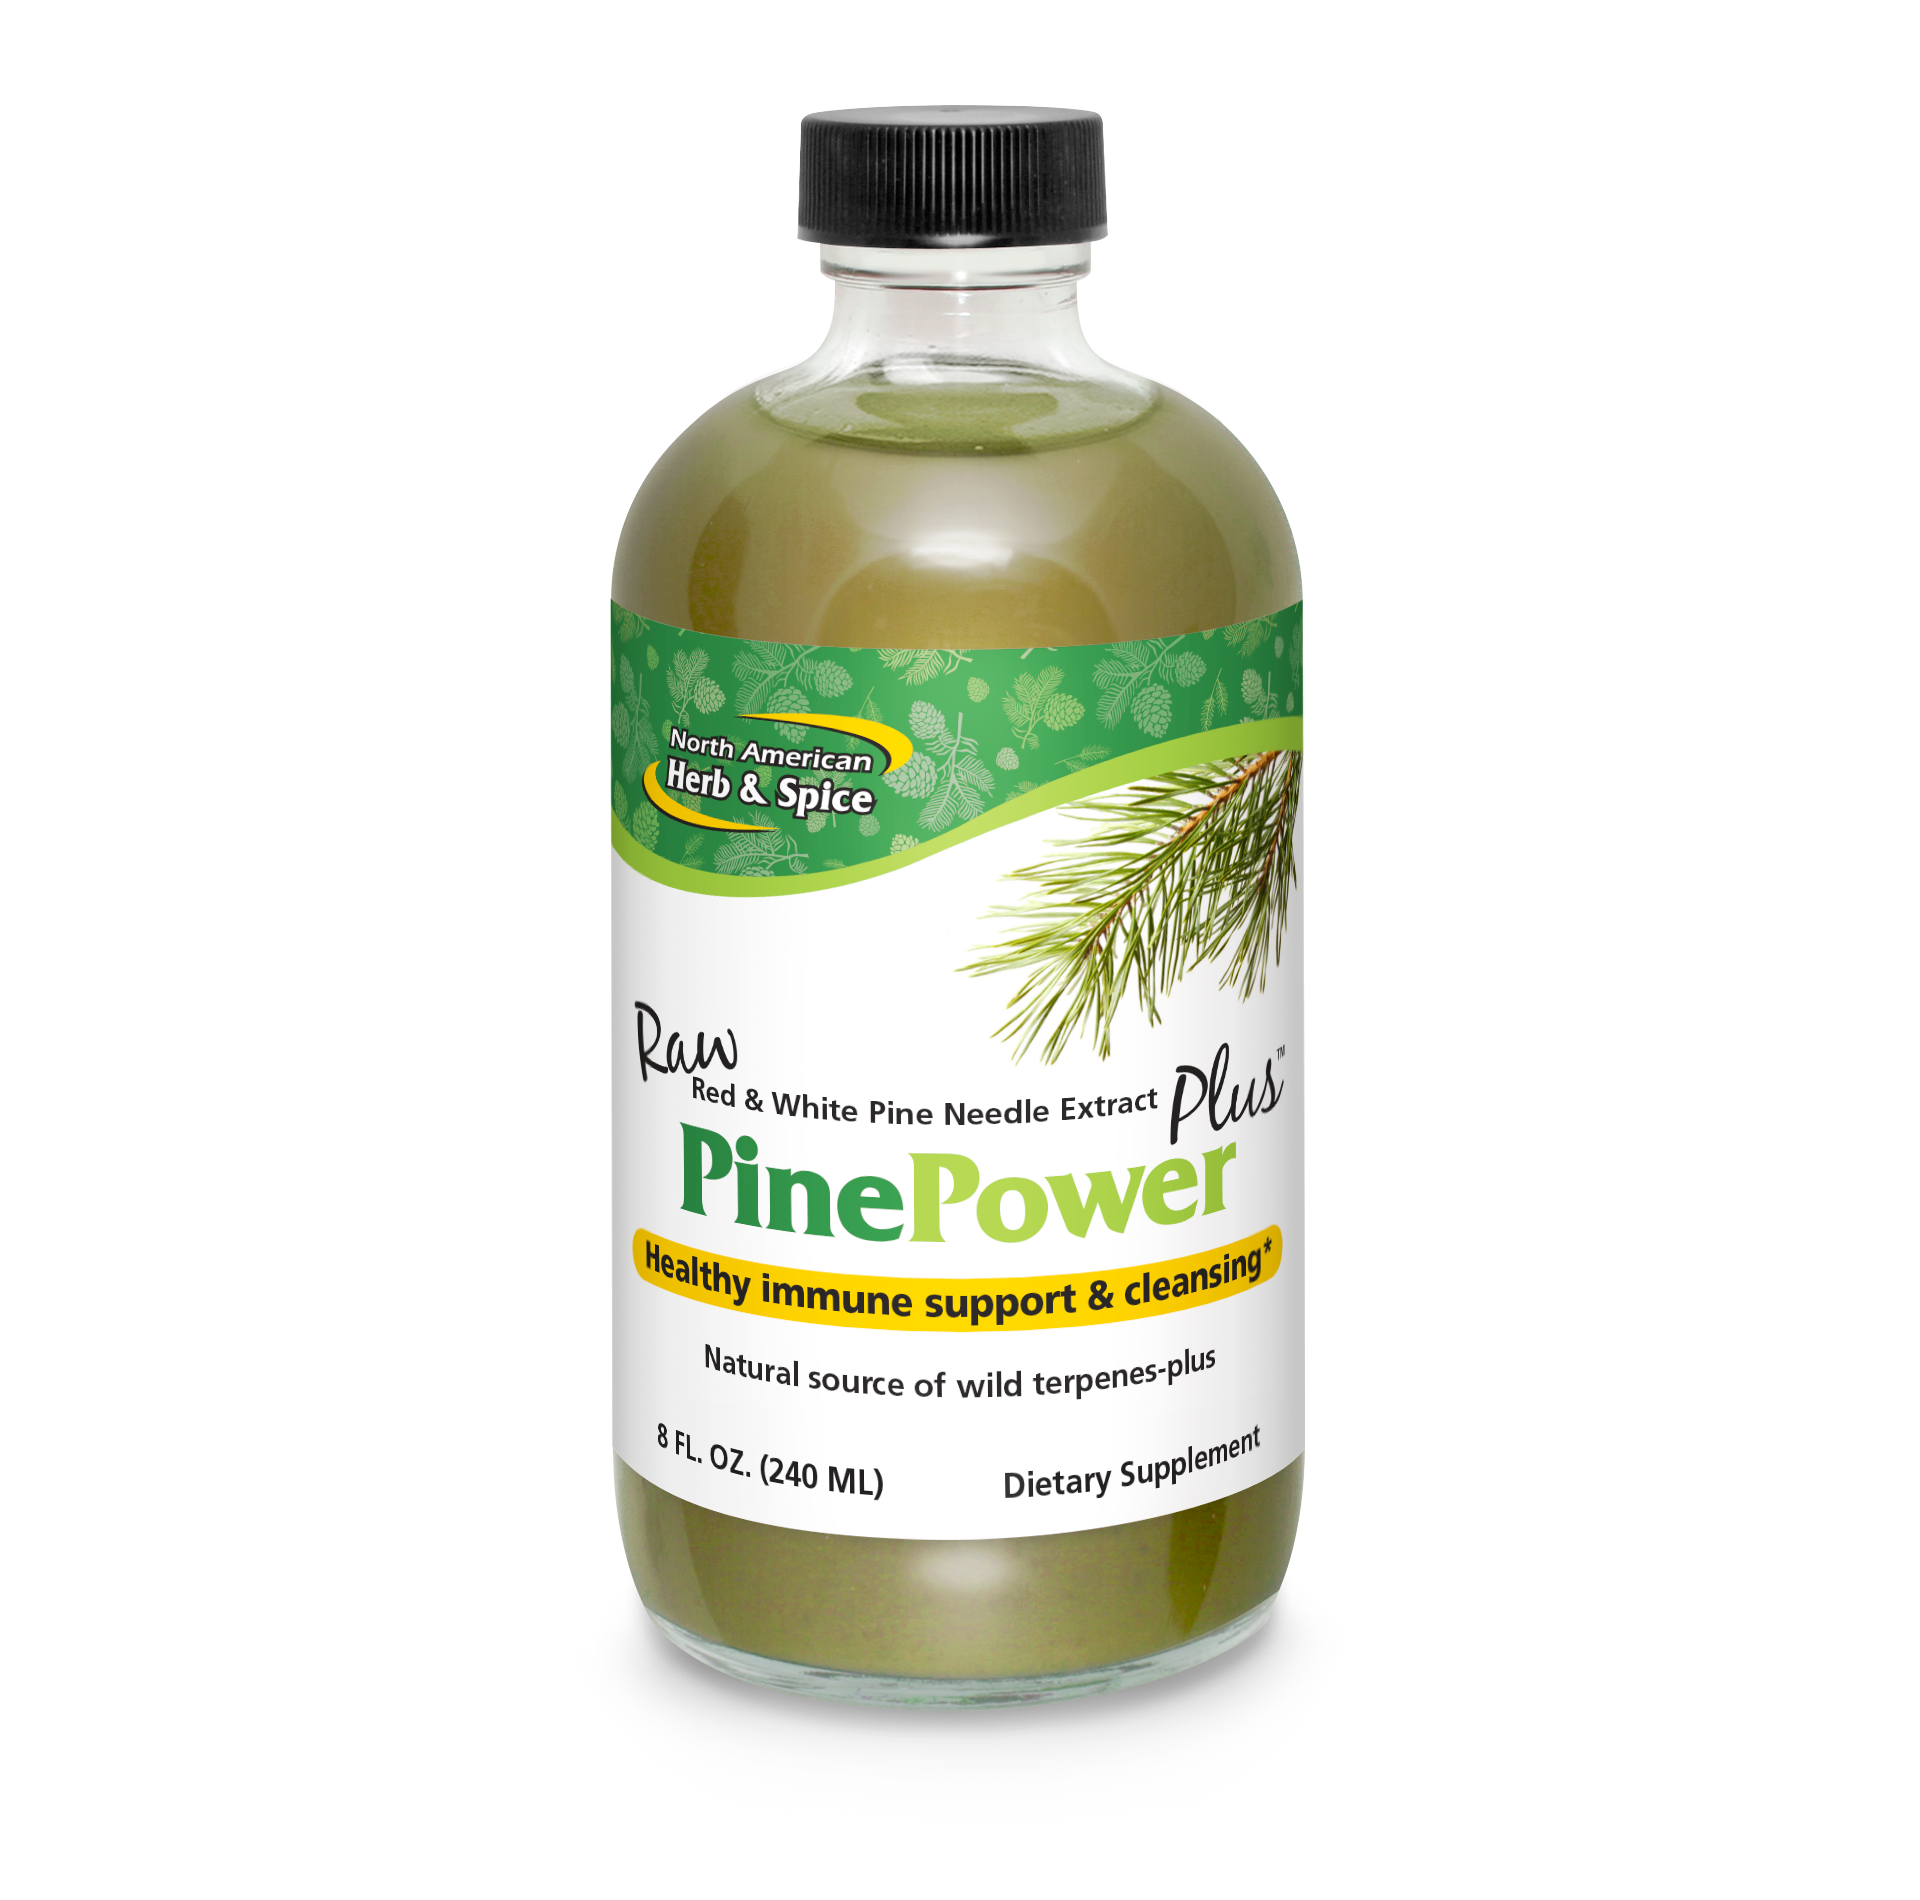 North American Herb and Spice Raw Pine Power Plus 8 fl.oz